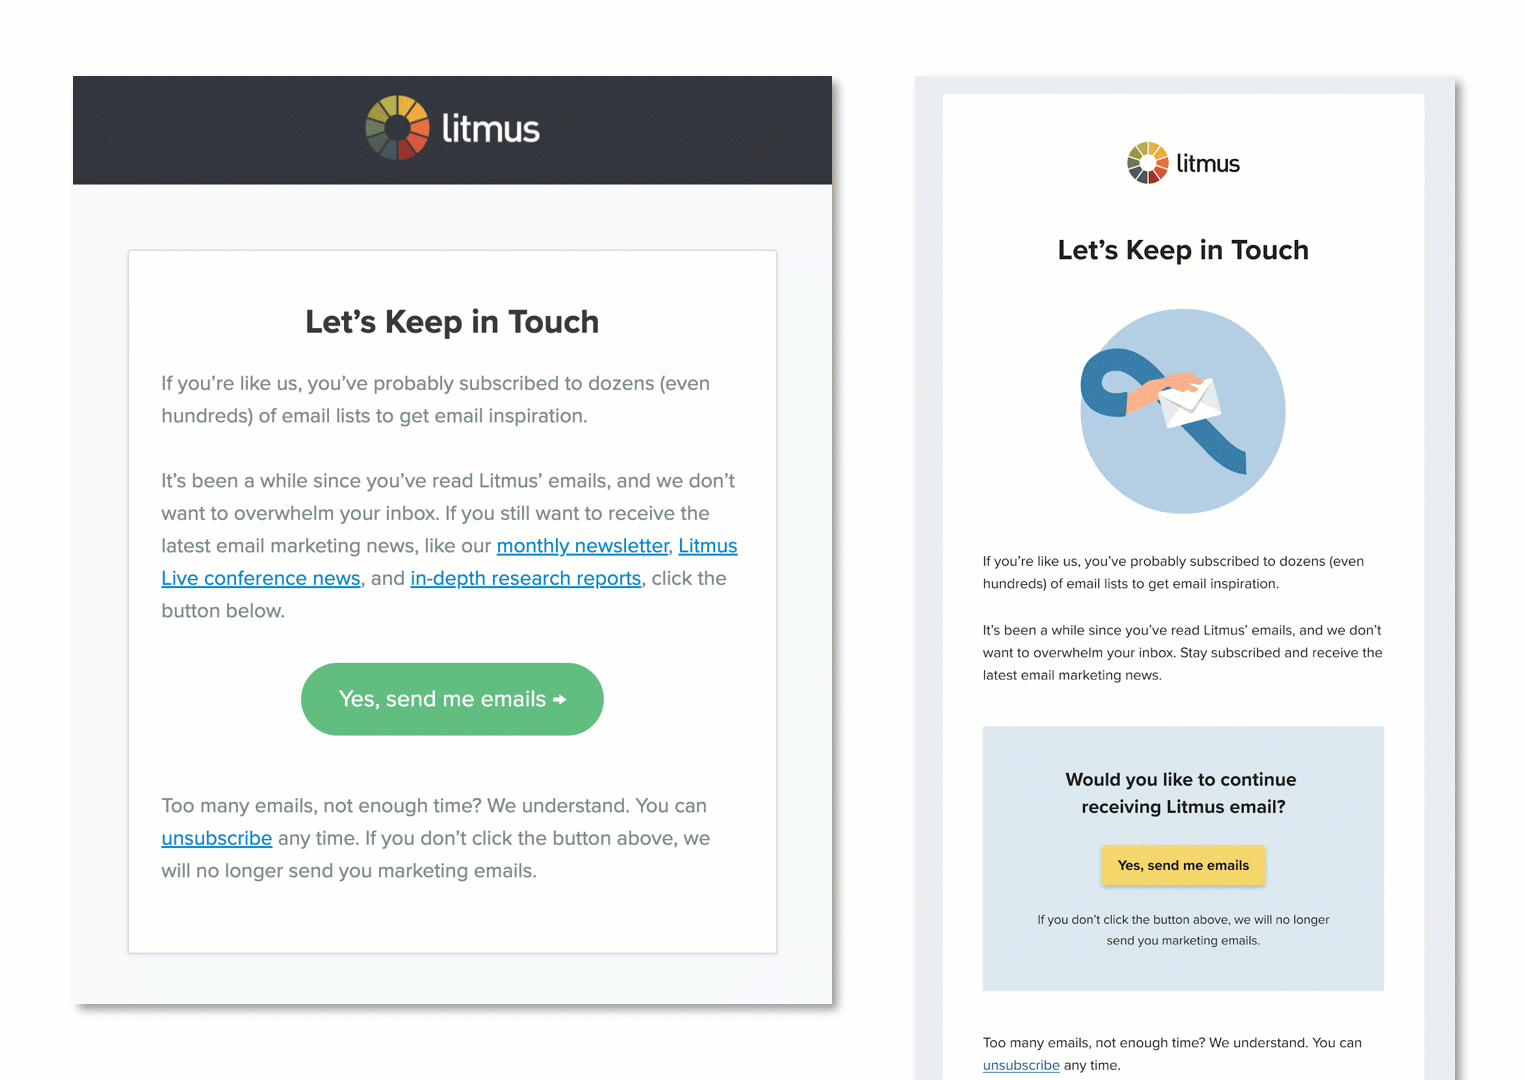 Litmus' own email a/b test with an old style text-heavy email vs a new fresh visual-heavy email